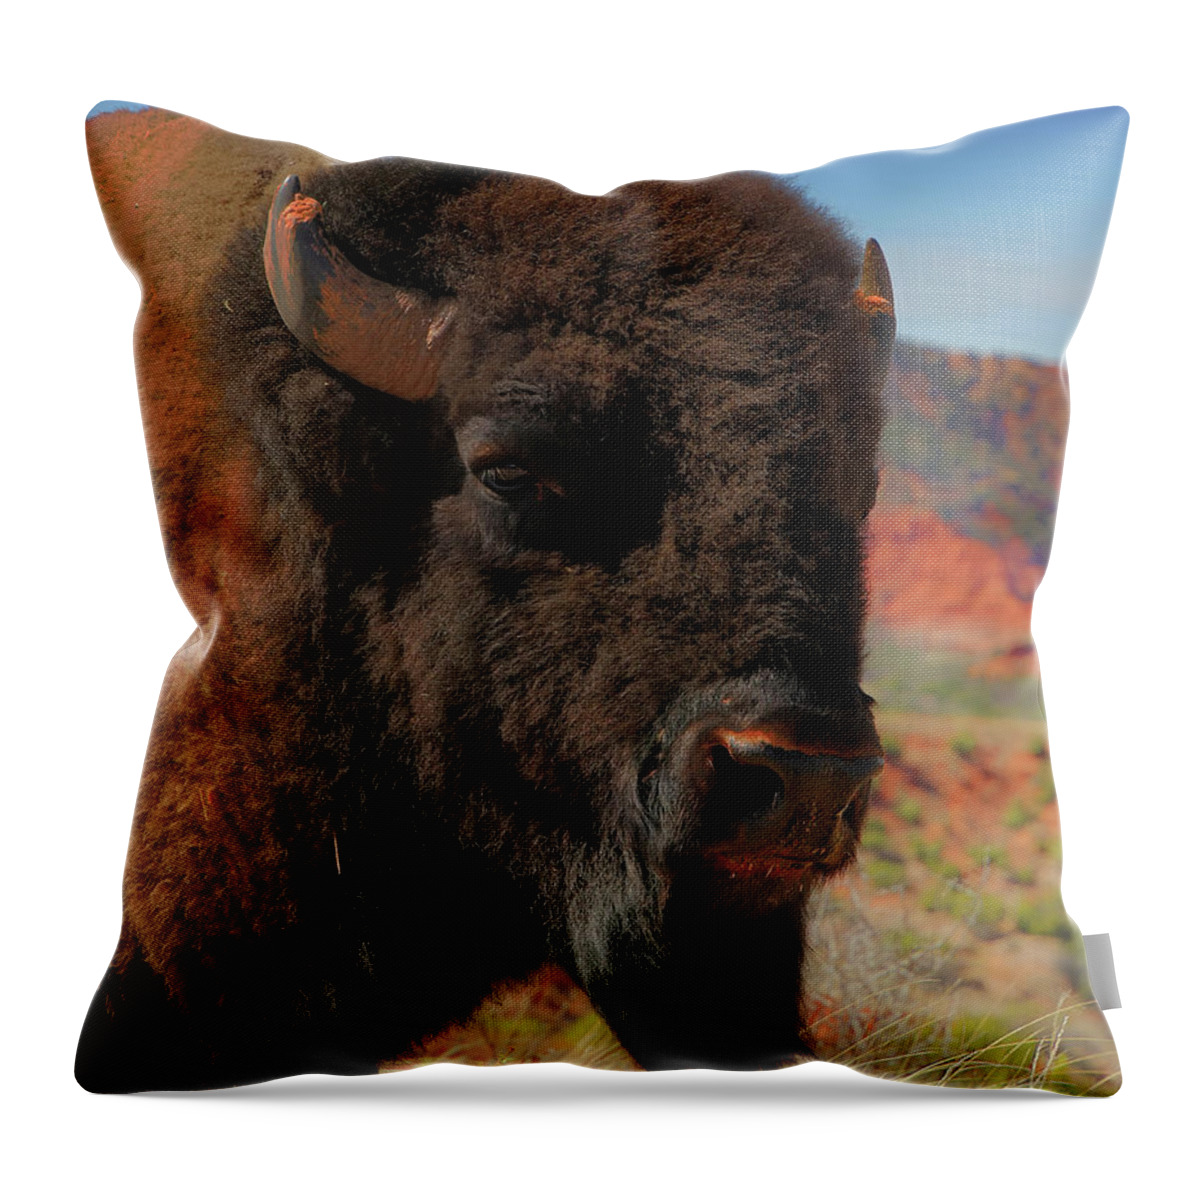 Bison Throw Pillow featuring the photograph Bison Portrait by Pam Rendall